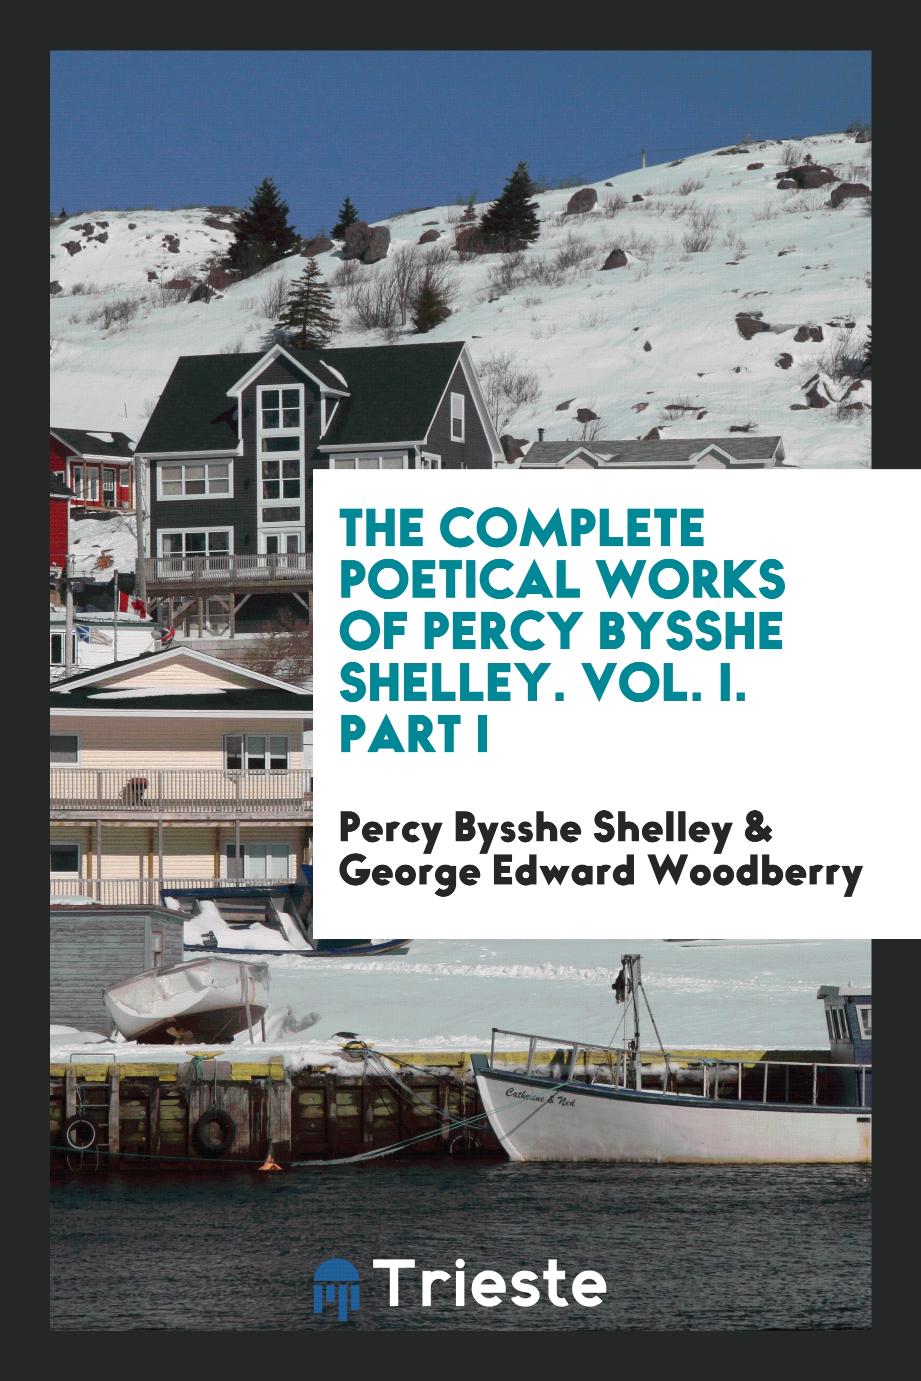 The Complete Poetical Works of Percy Bysshe Shelley. Vol. I. Part I